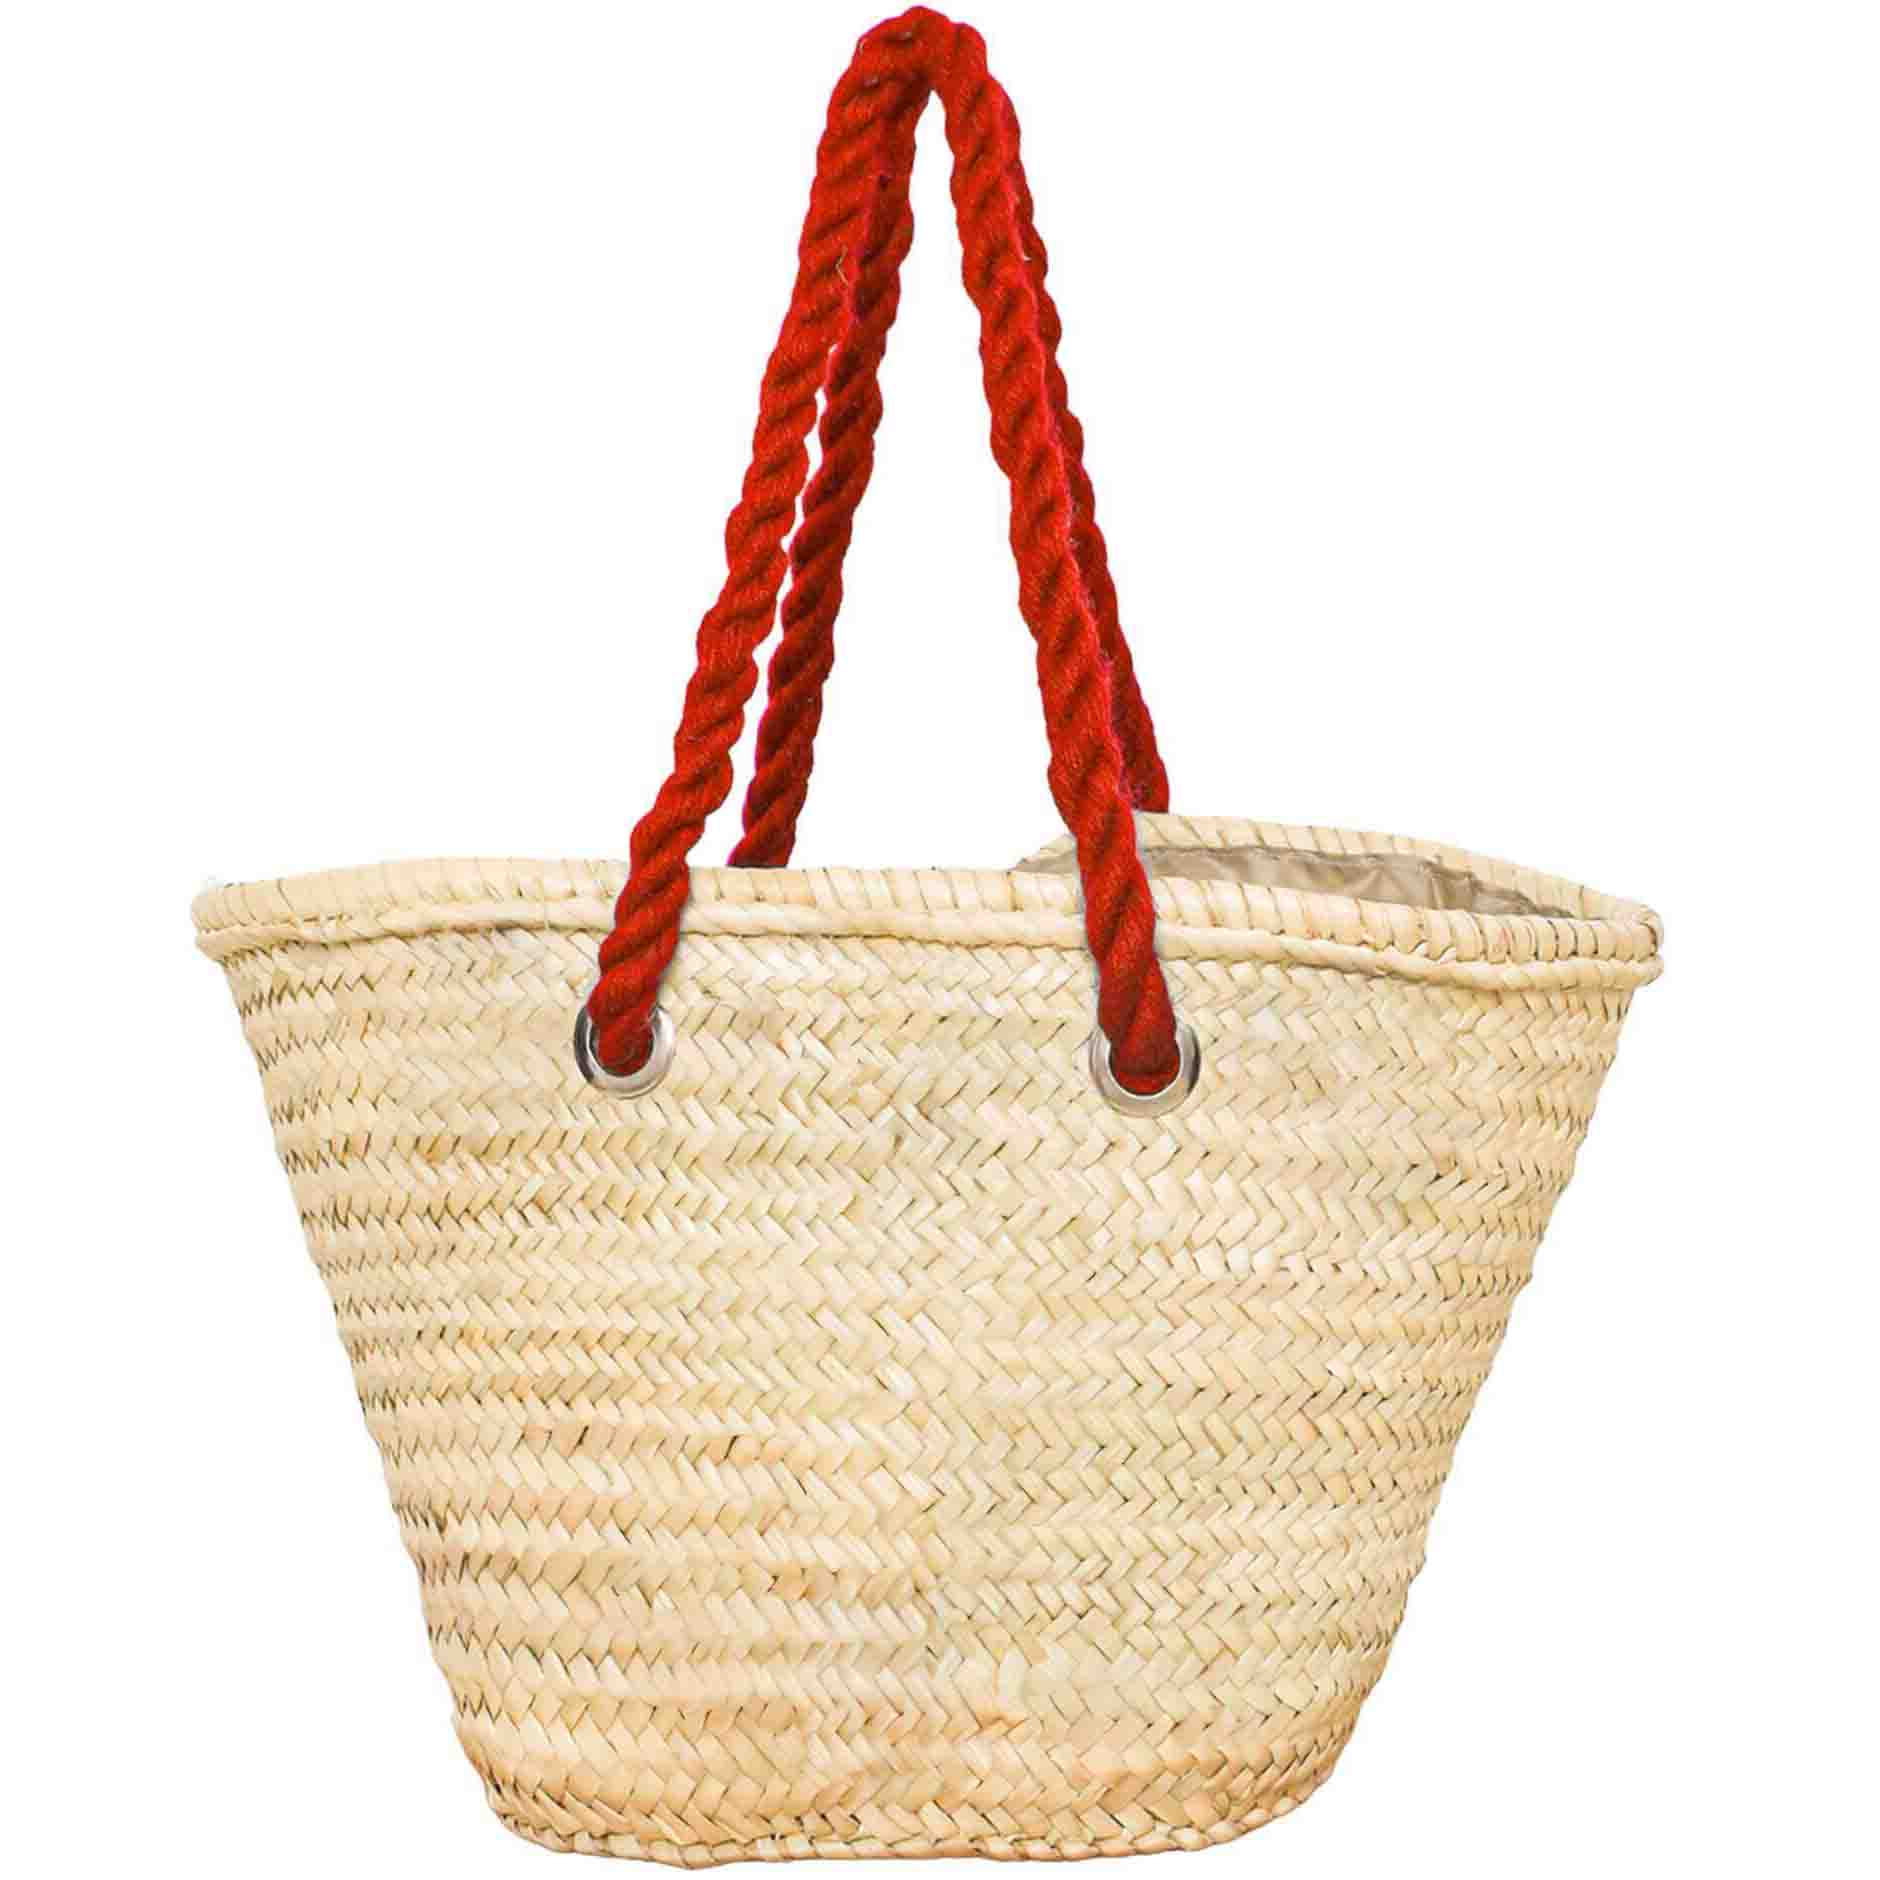 Chic Personalized Straw Bags: Elevate Special Moments!